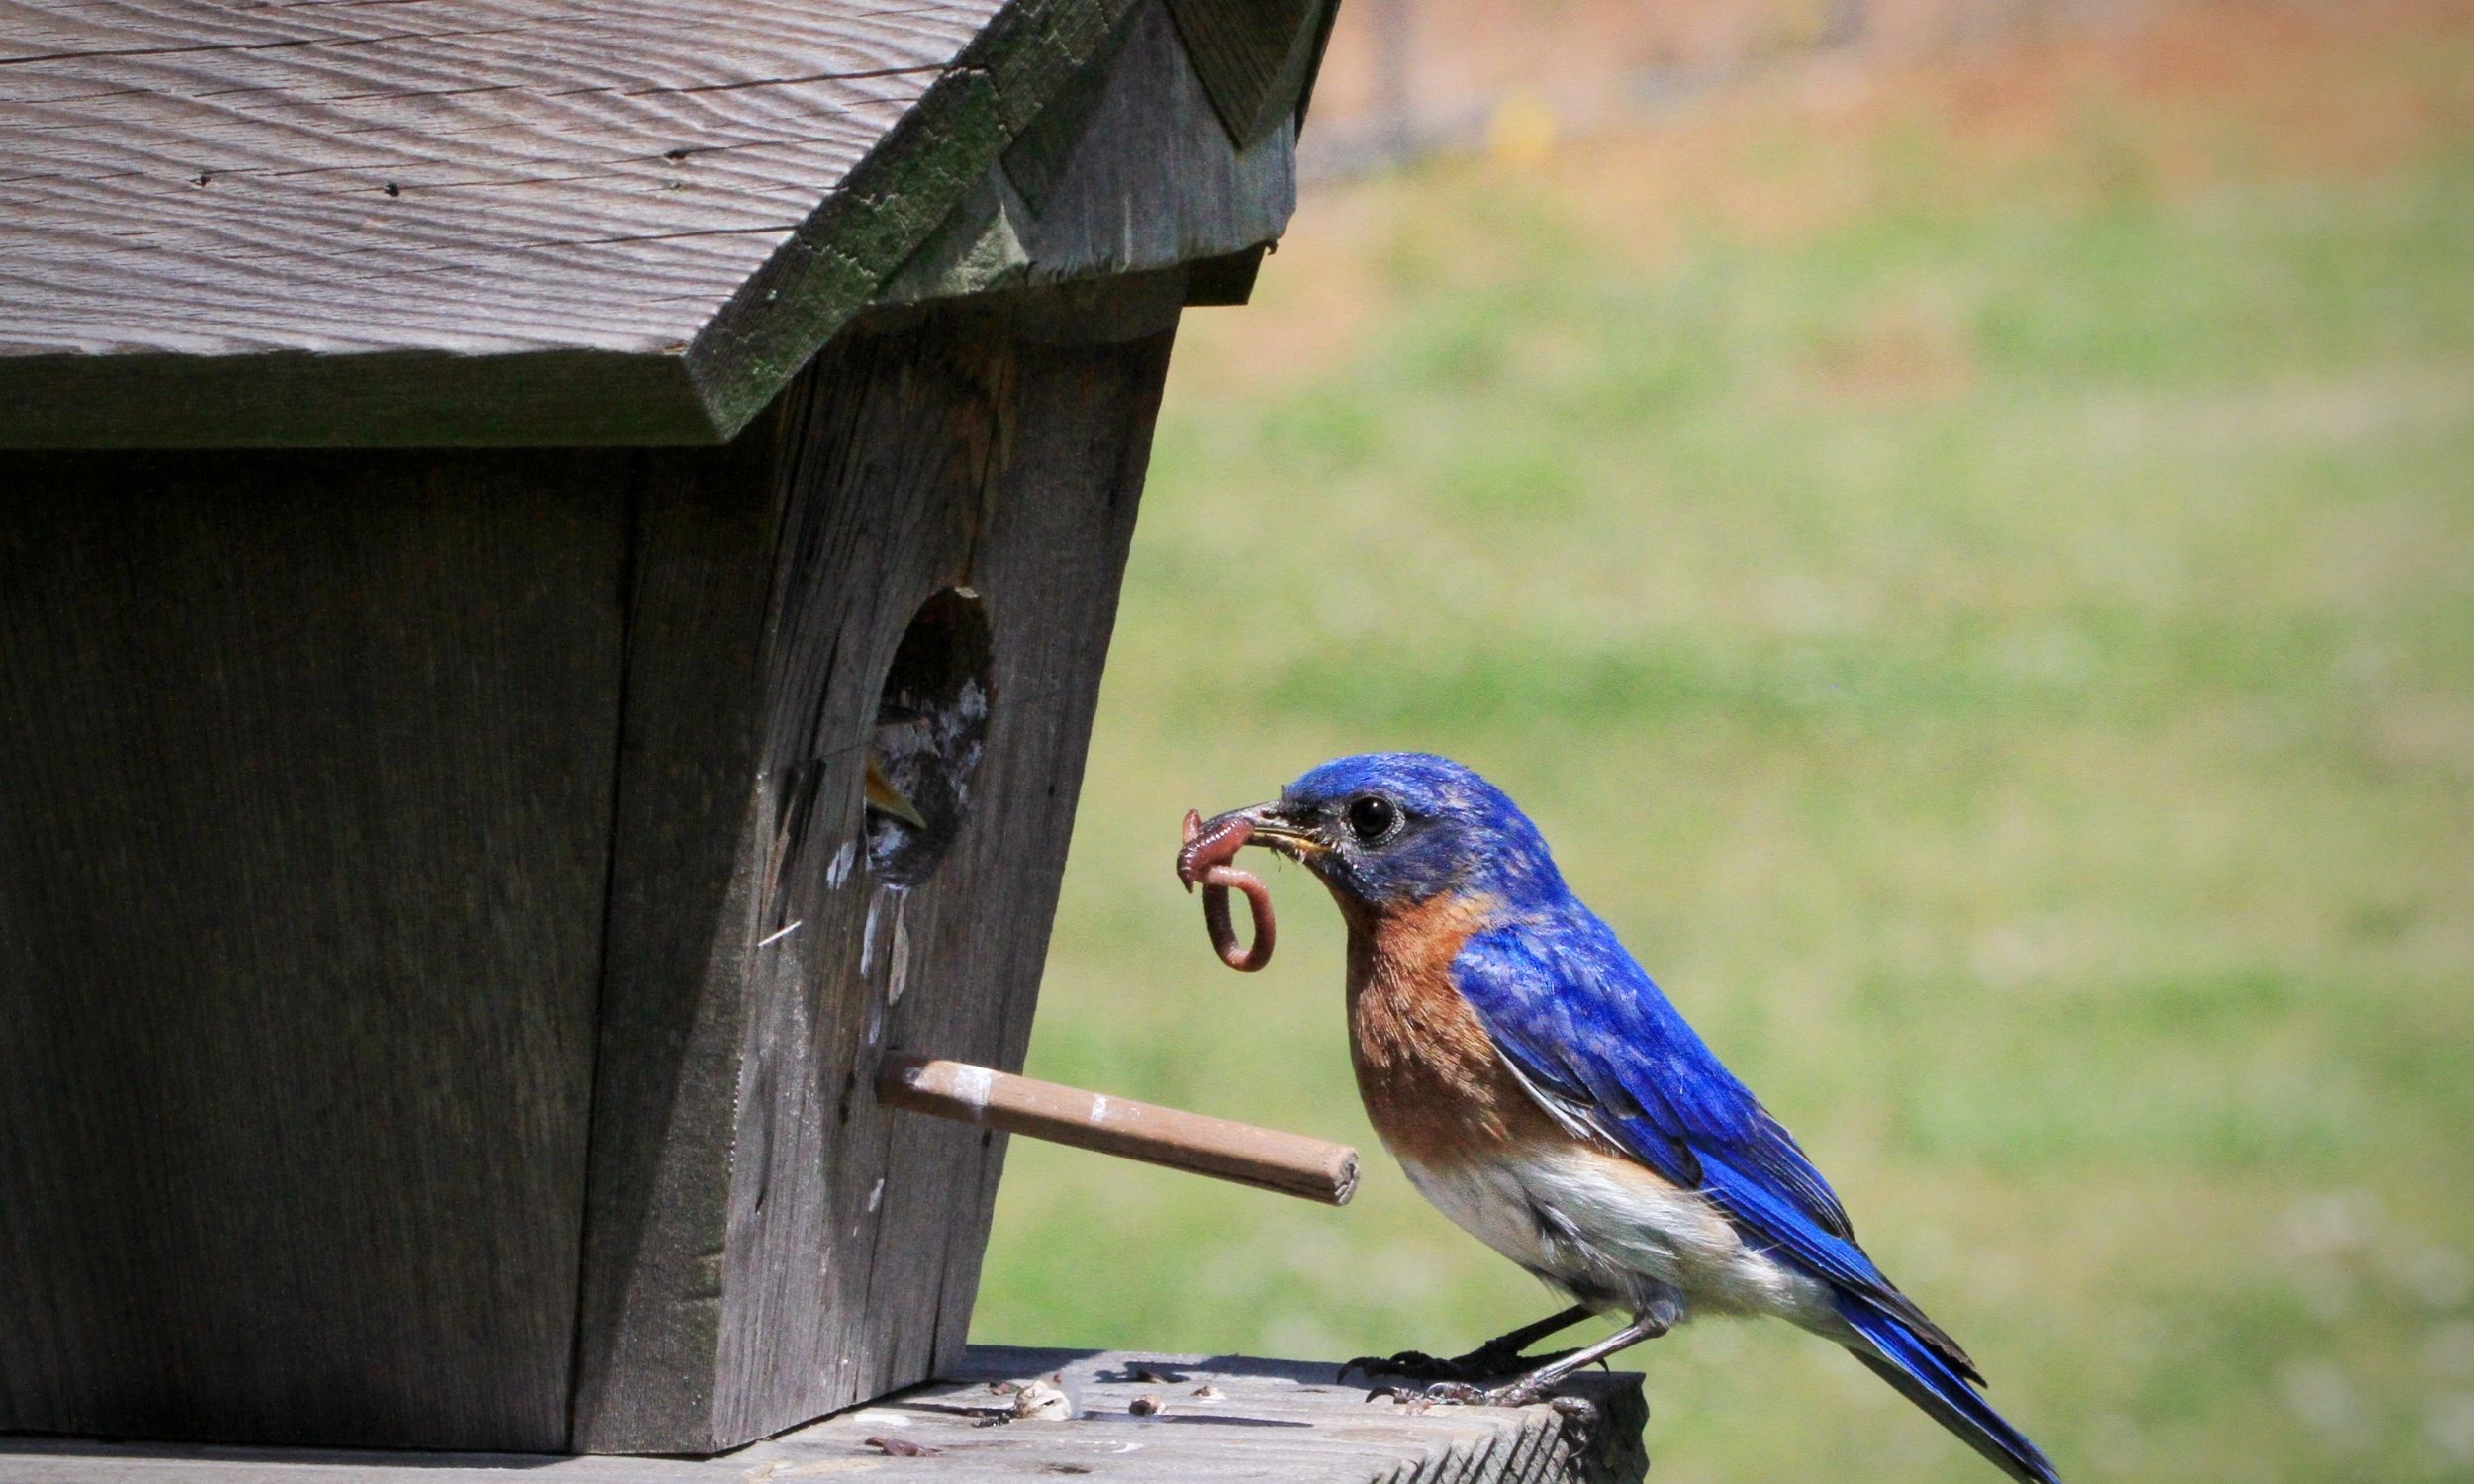 How to Attract Bluebirds – Setting Up a Bluebird House